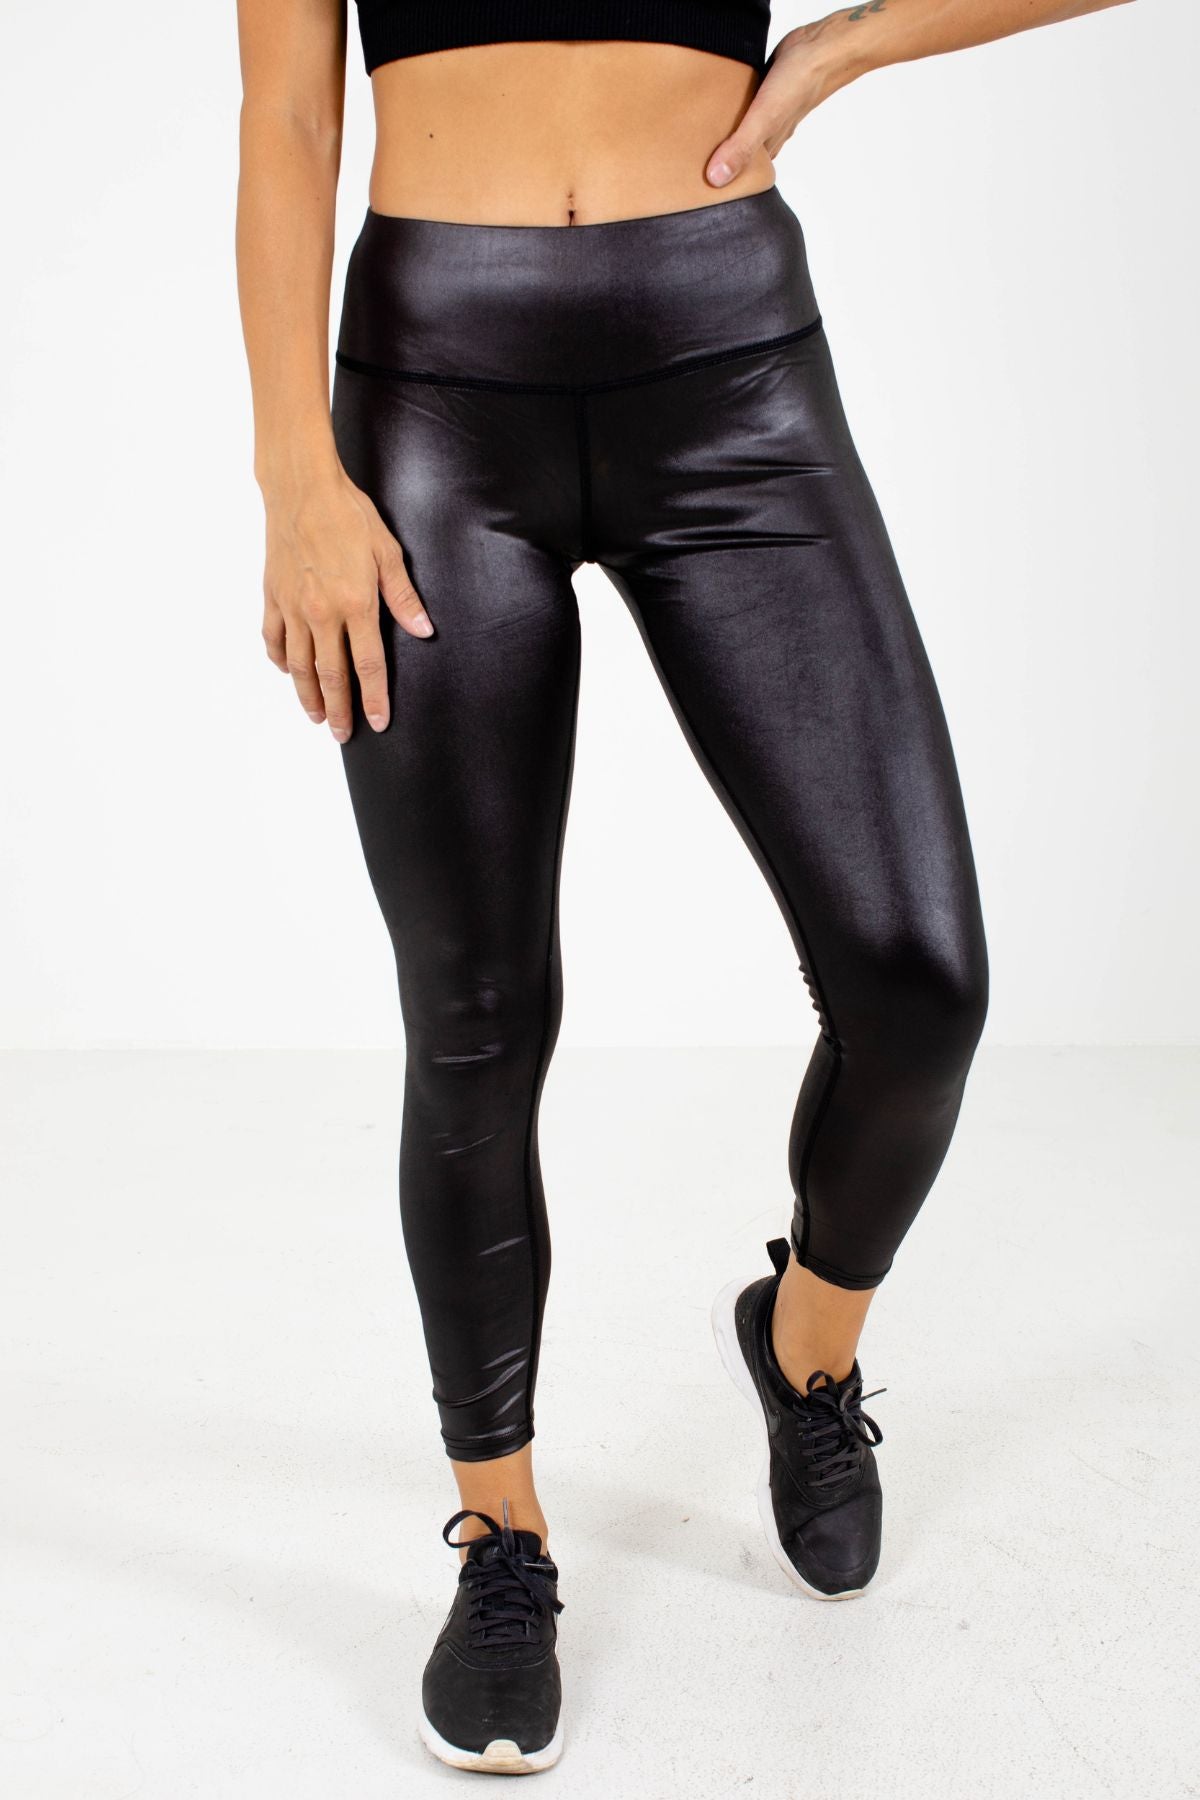 Women's Black High Waisted Boutique Activewear Leggings